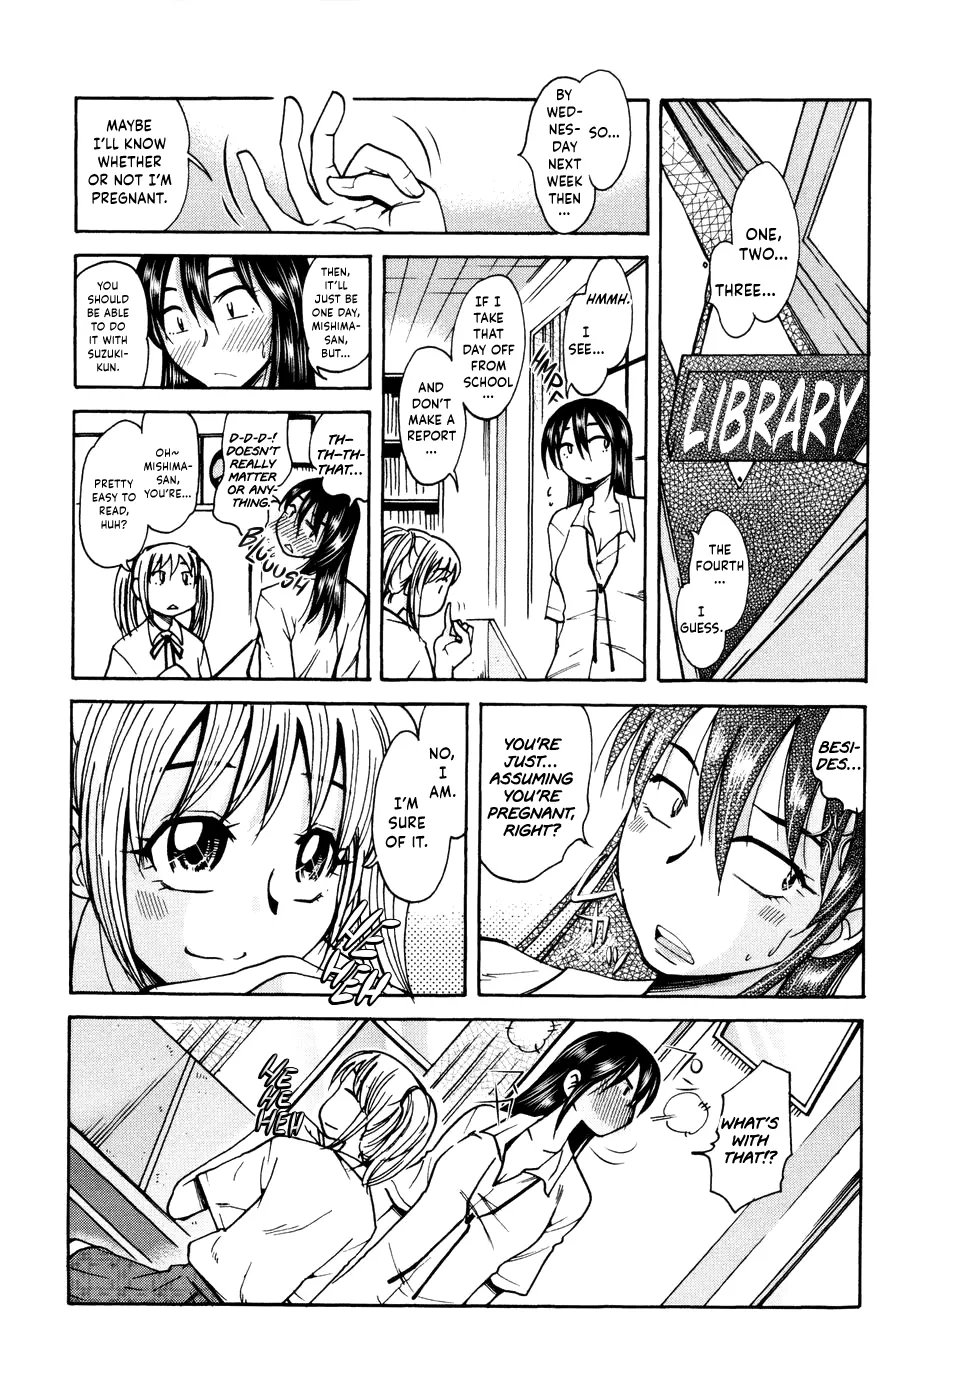 Besi Story Porn - Love Dere - It is crazy about love.(Page 157) - Hentai Manga